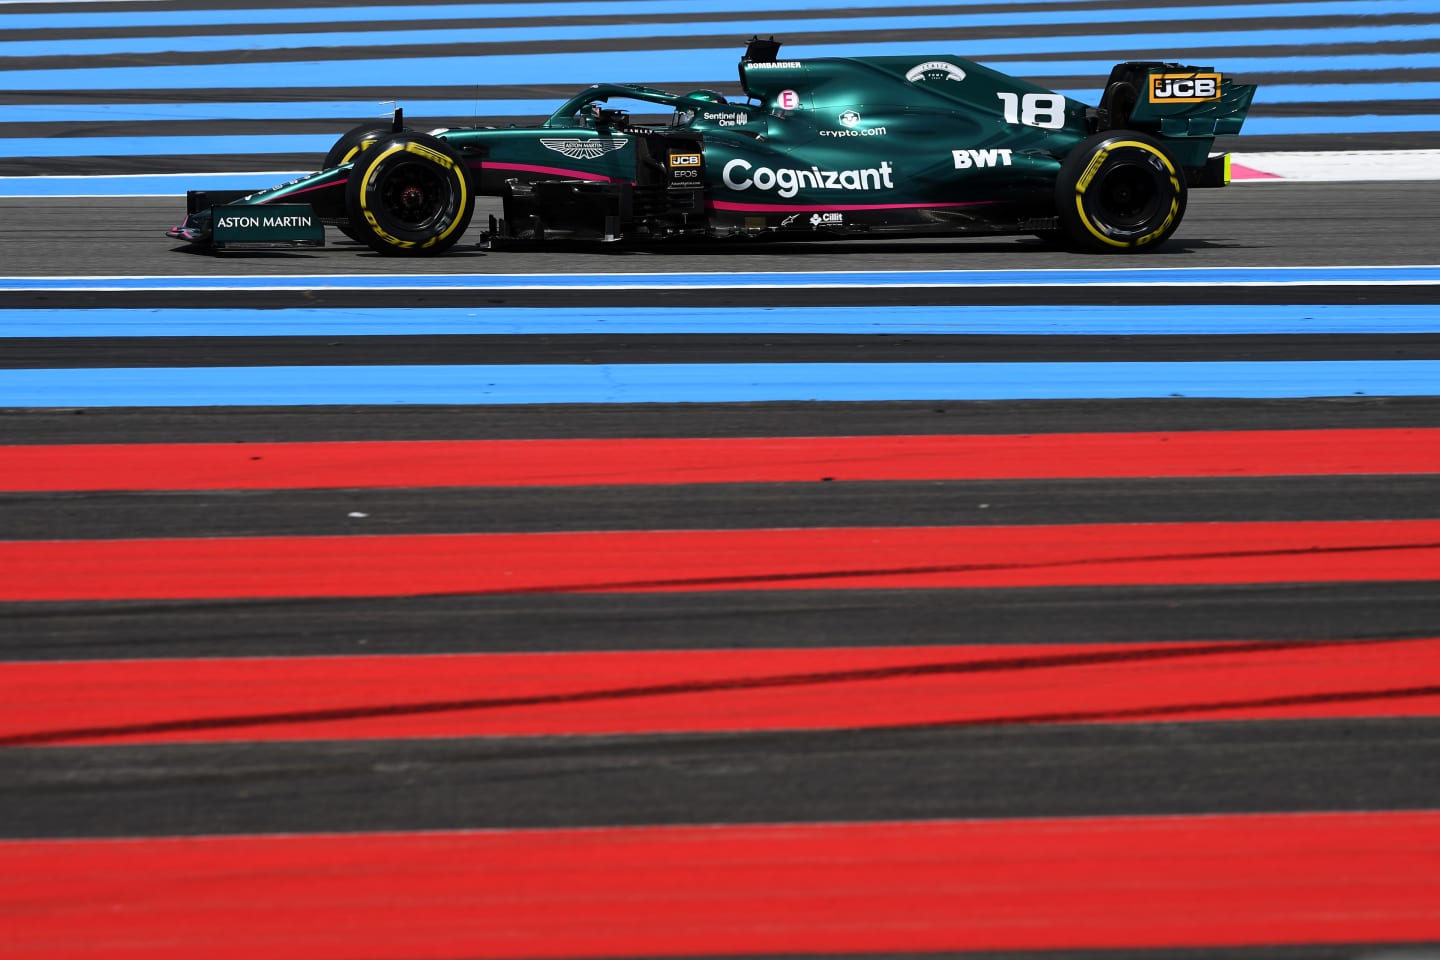 LE CASTELLET, FRANCE - JUNE 18: Lance Stroll of Canada driving the (18) Aston Martin AMR21 Mercedes on track during practice ahead of the F1 Grand Prix of France at Circuit Paul Ricard on June 18, 2021 in Le Castellet, France. (Photo by Rudy Carezzevoli/Getty Images)